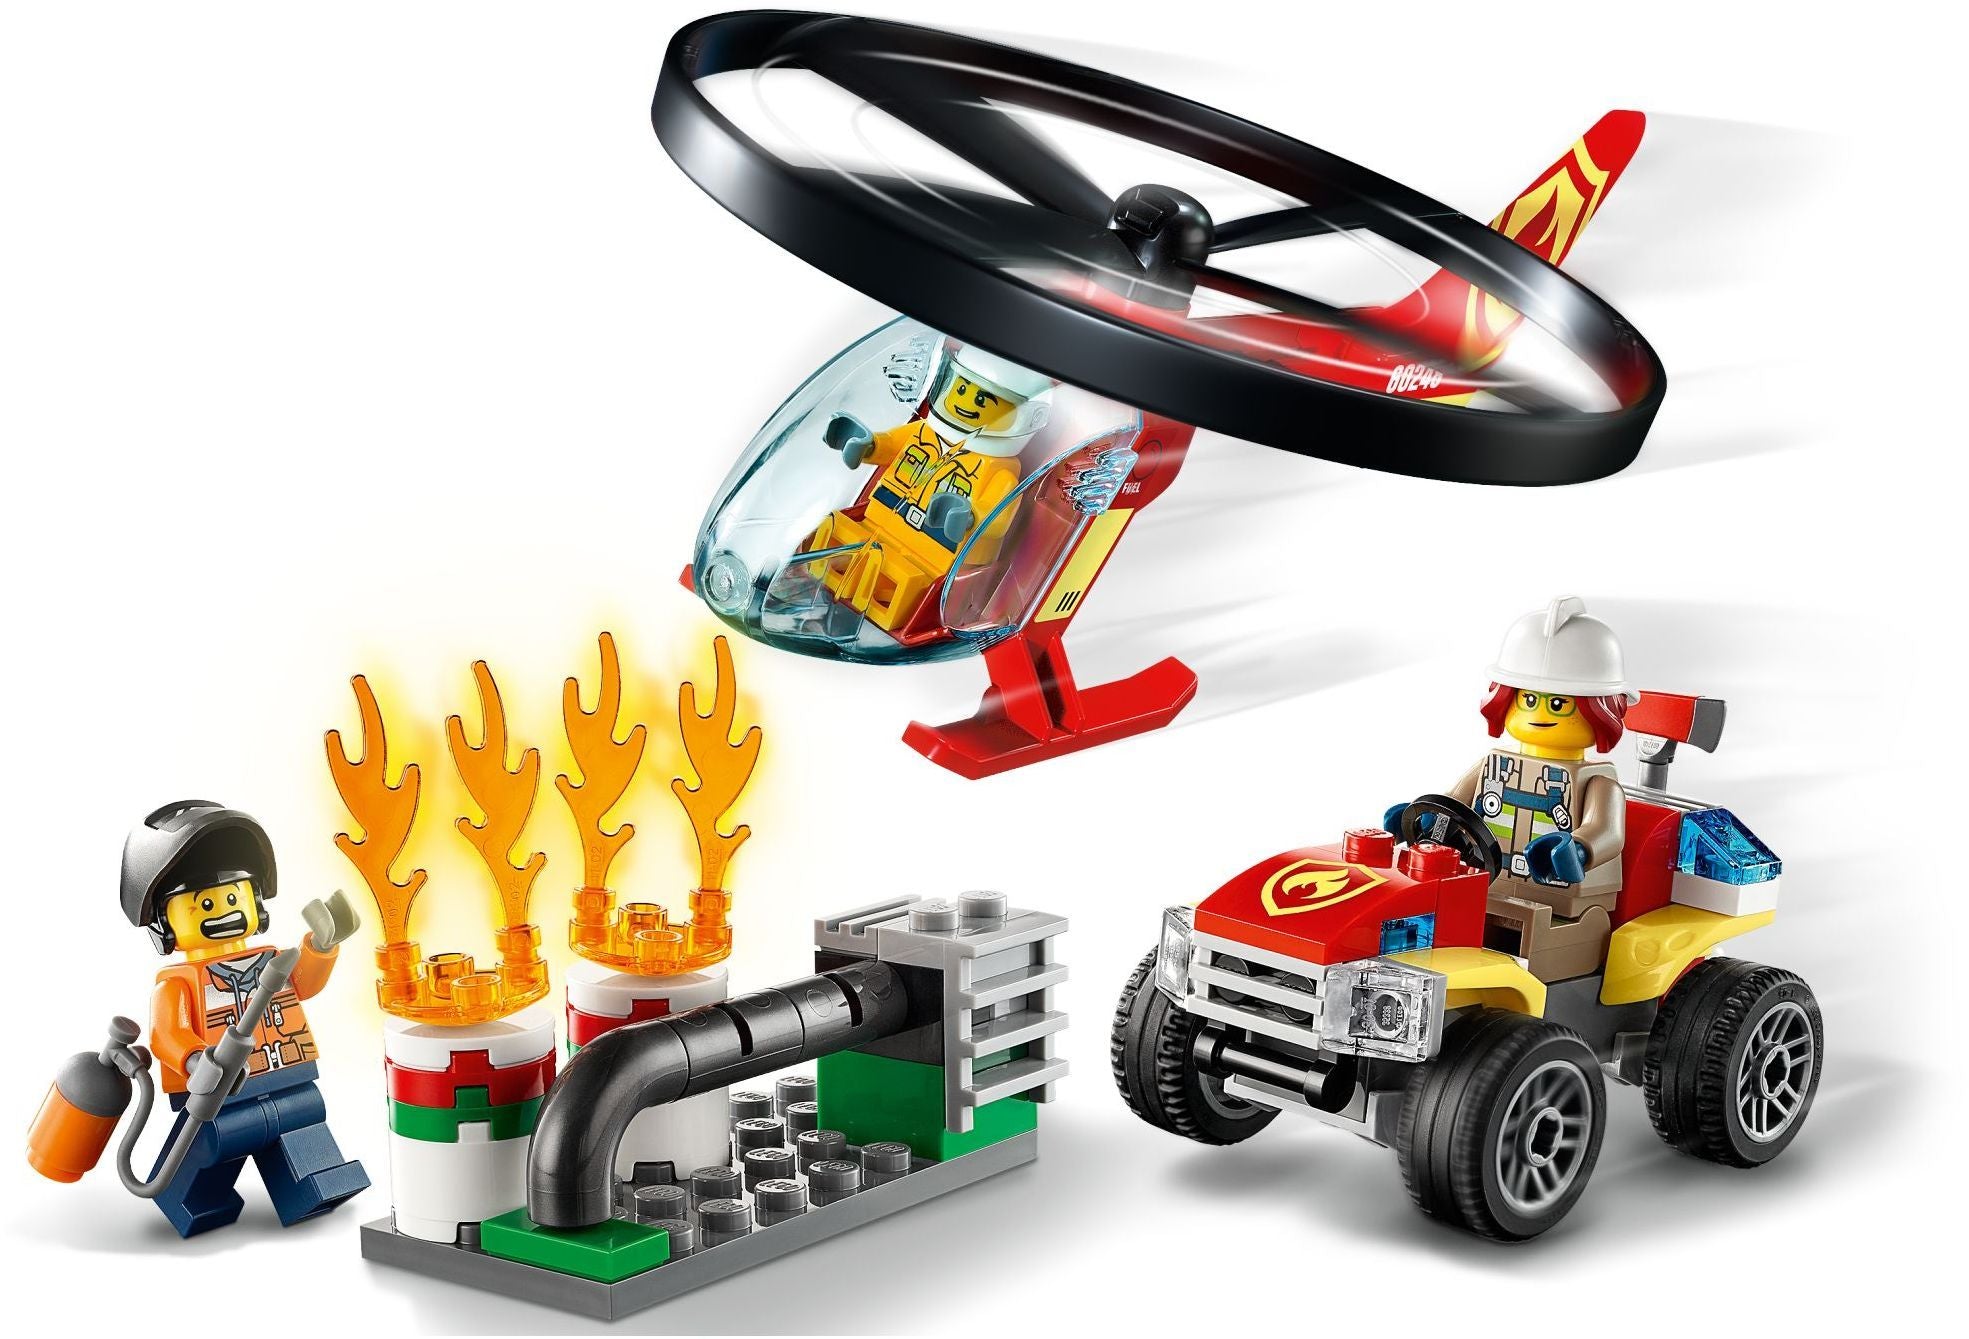 LEGO 60248 Fire Helicopter Response